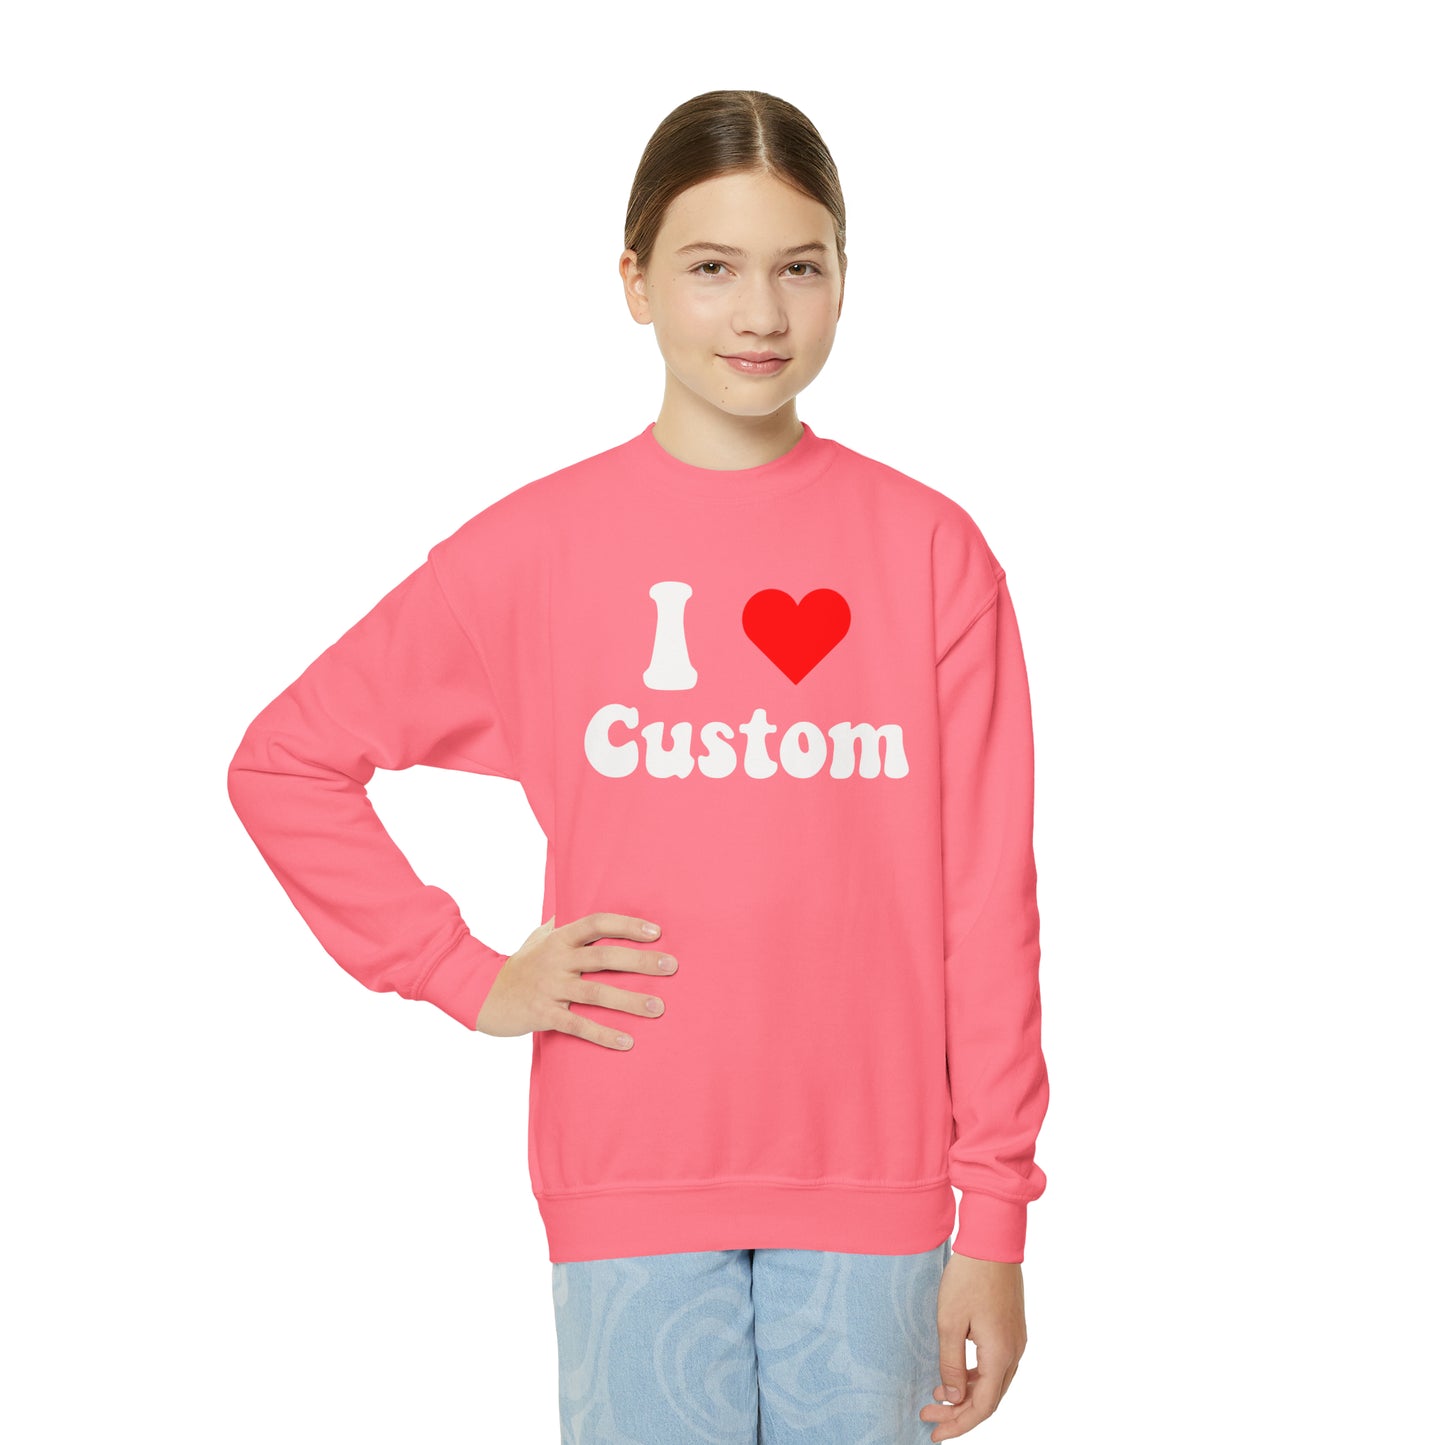 I Love Custom Kids Sweatshirt, I Heart Pullover Personalized Design Printed Boys Girls Gift Graphic Cotton Crewneck Pullover Top